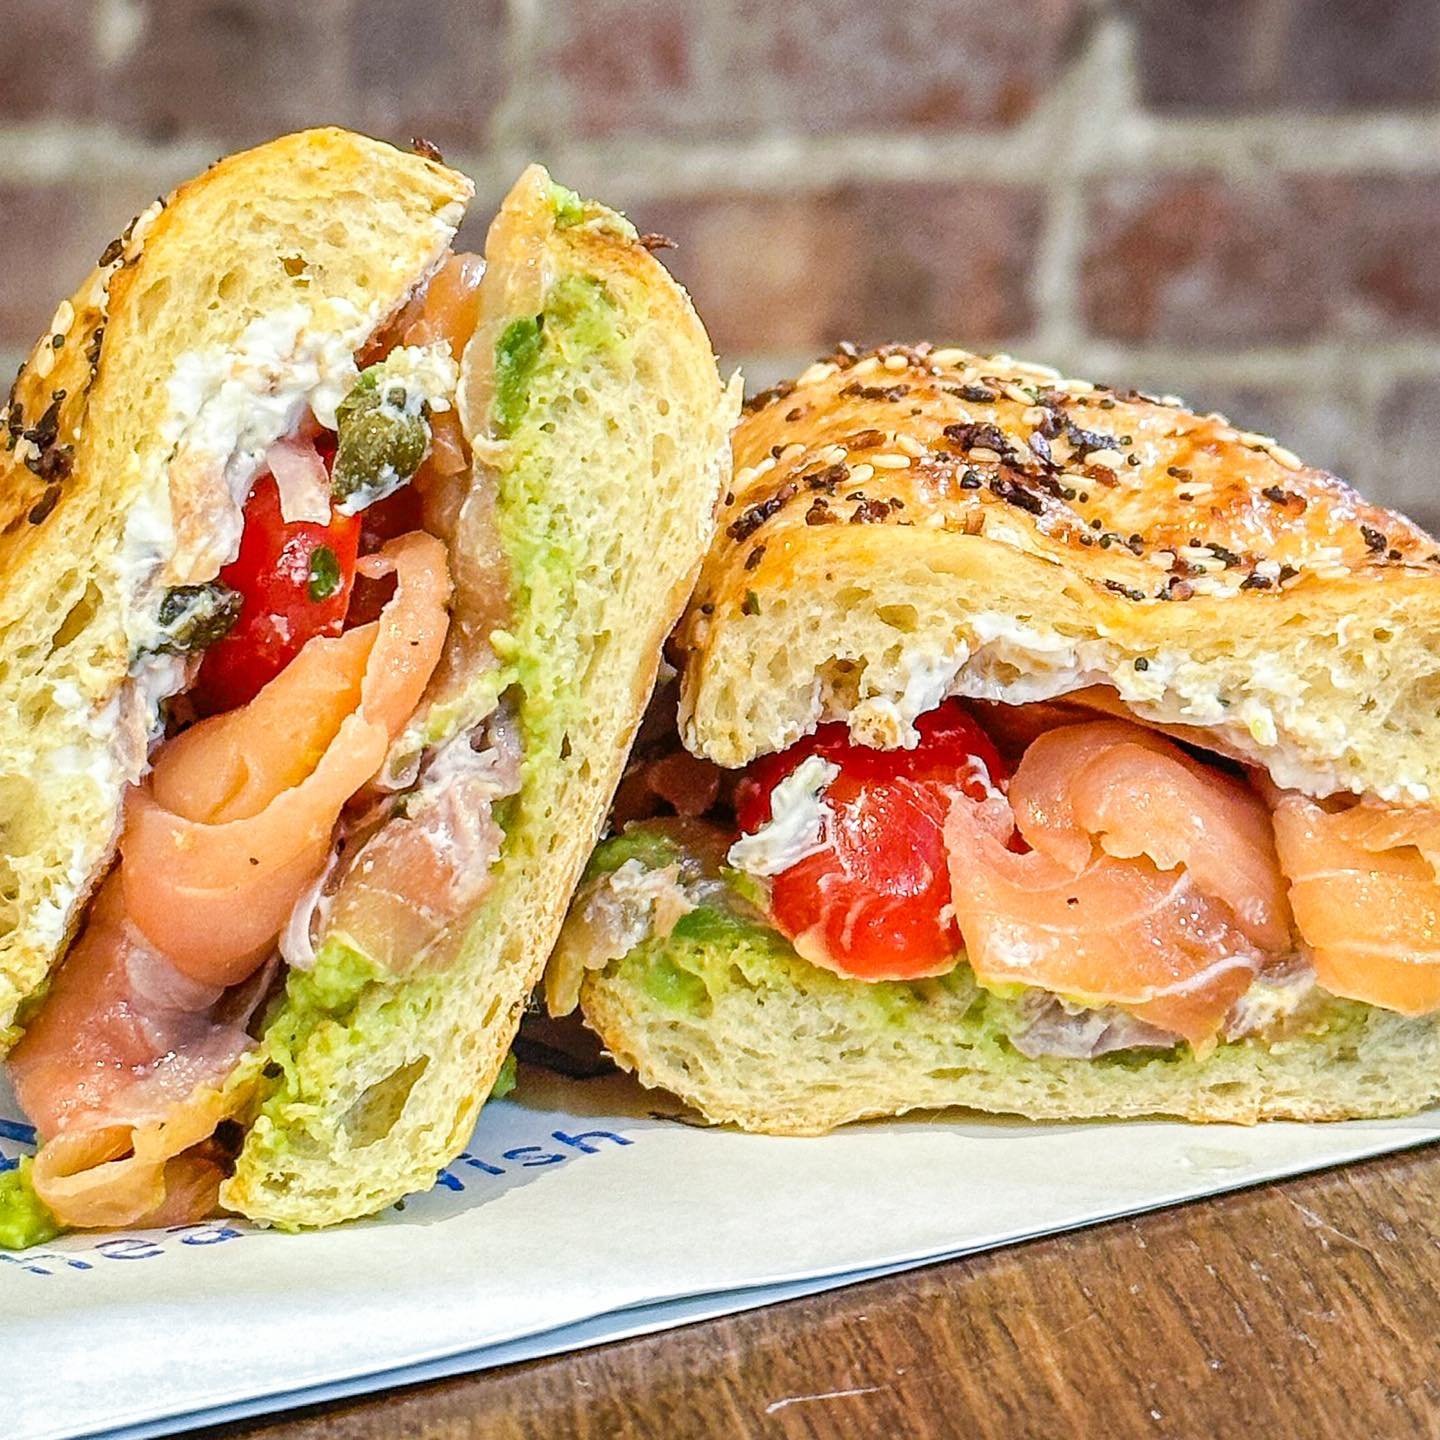 the Everything Hoagel is a little bit bagel, a little bit hero, with a whole lotta New York in its soul. fluffy, chewy, bagely &amp; more - try this one-of-one bagel x sub crossover and you&rsquo;ll realize why we sold out the first few days, only @g